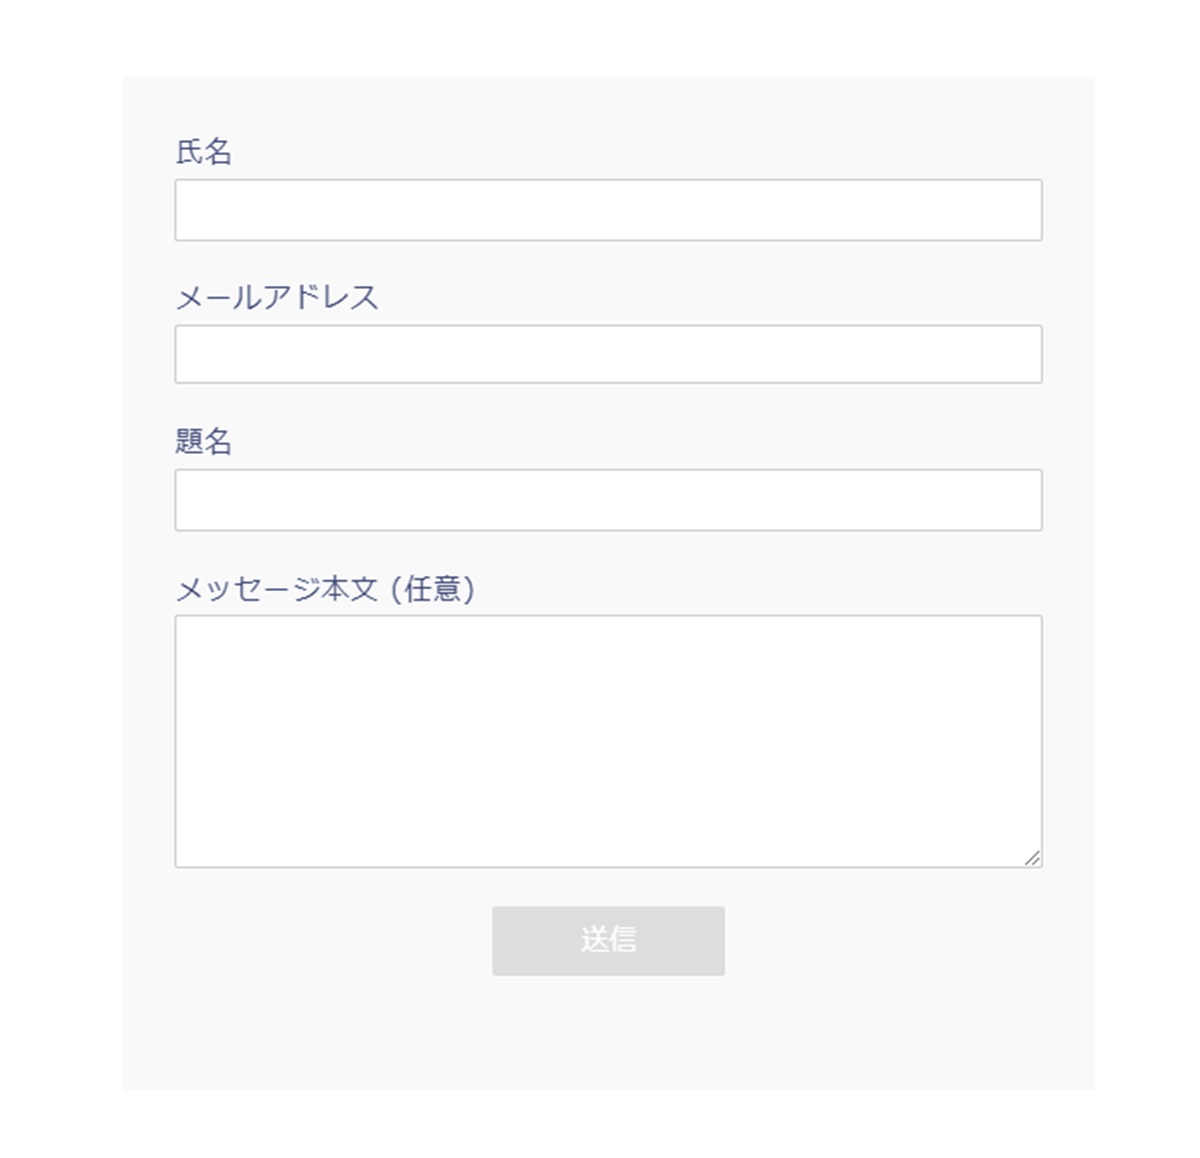 Contact Form 7からテスト送信